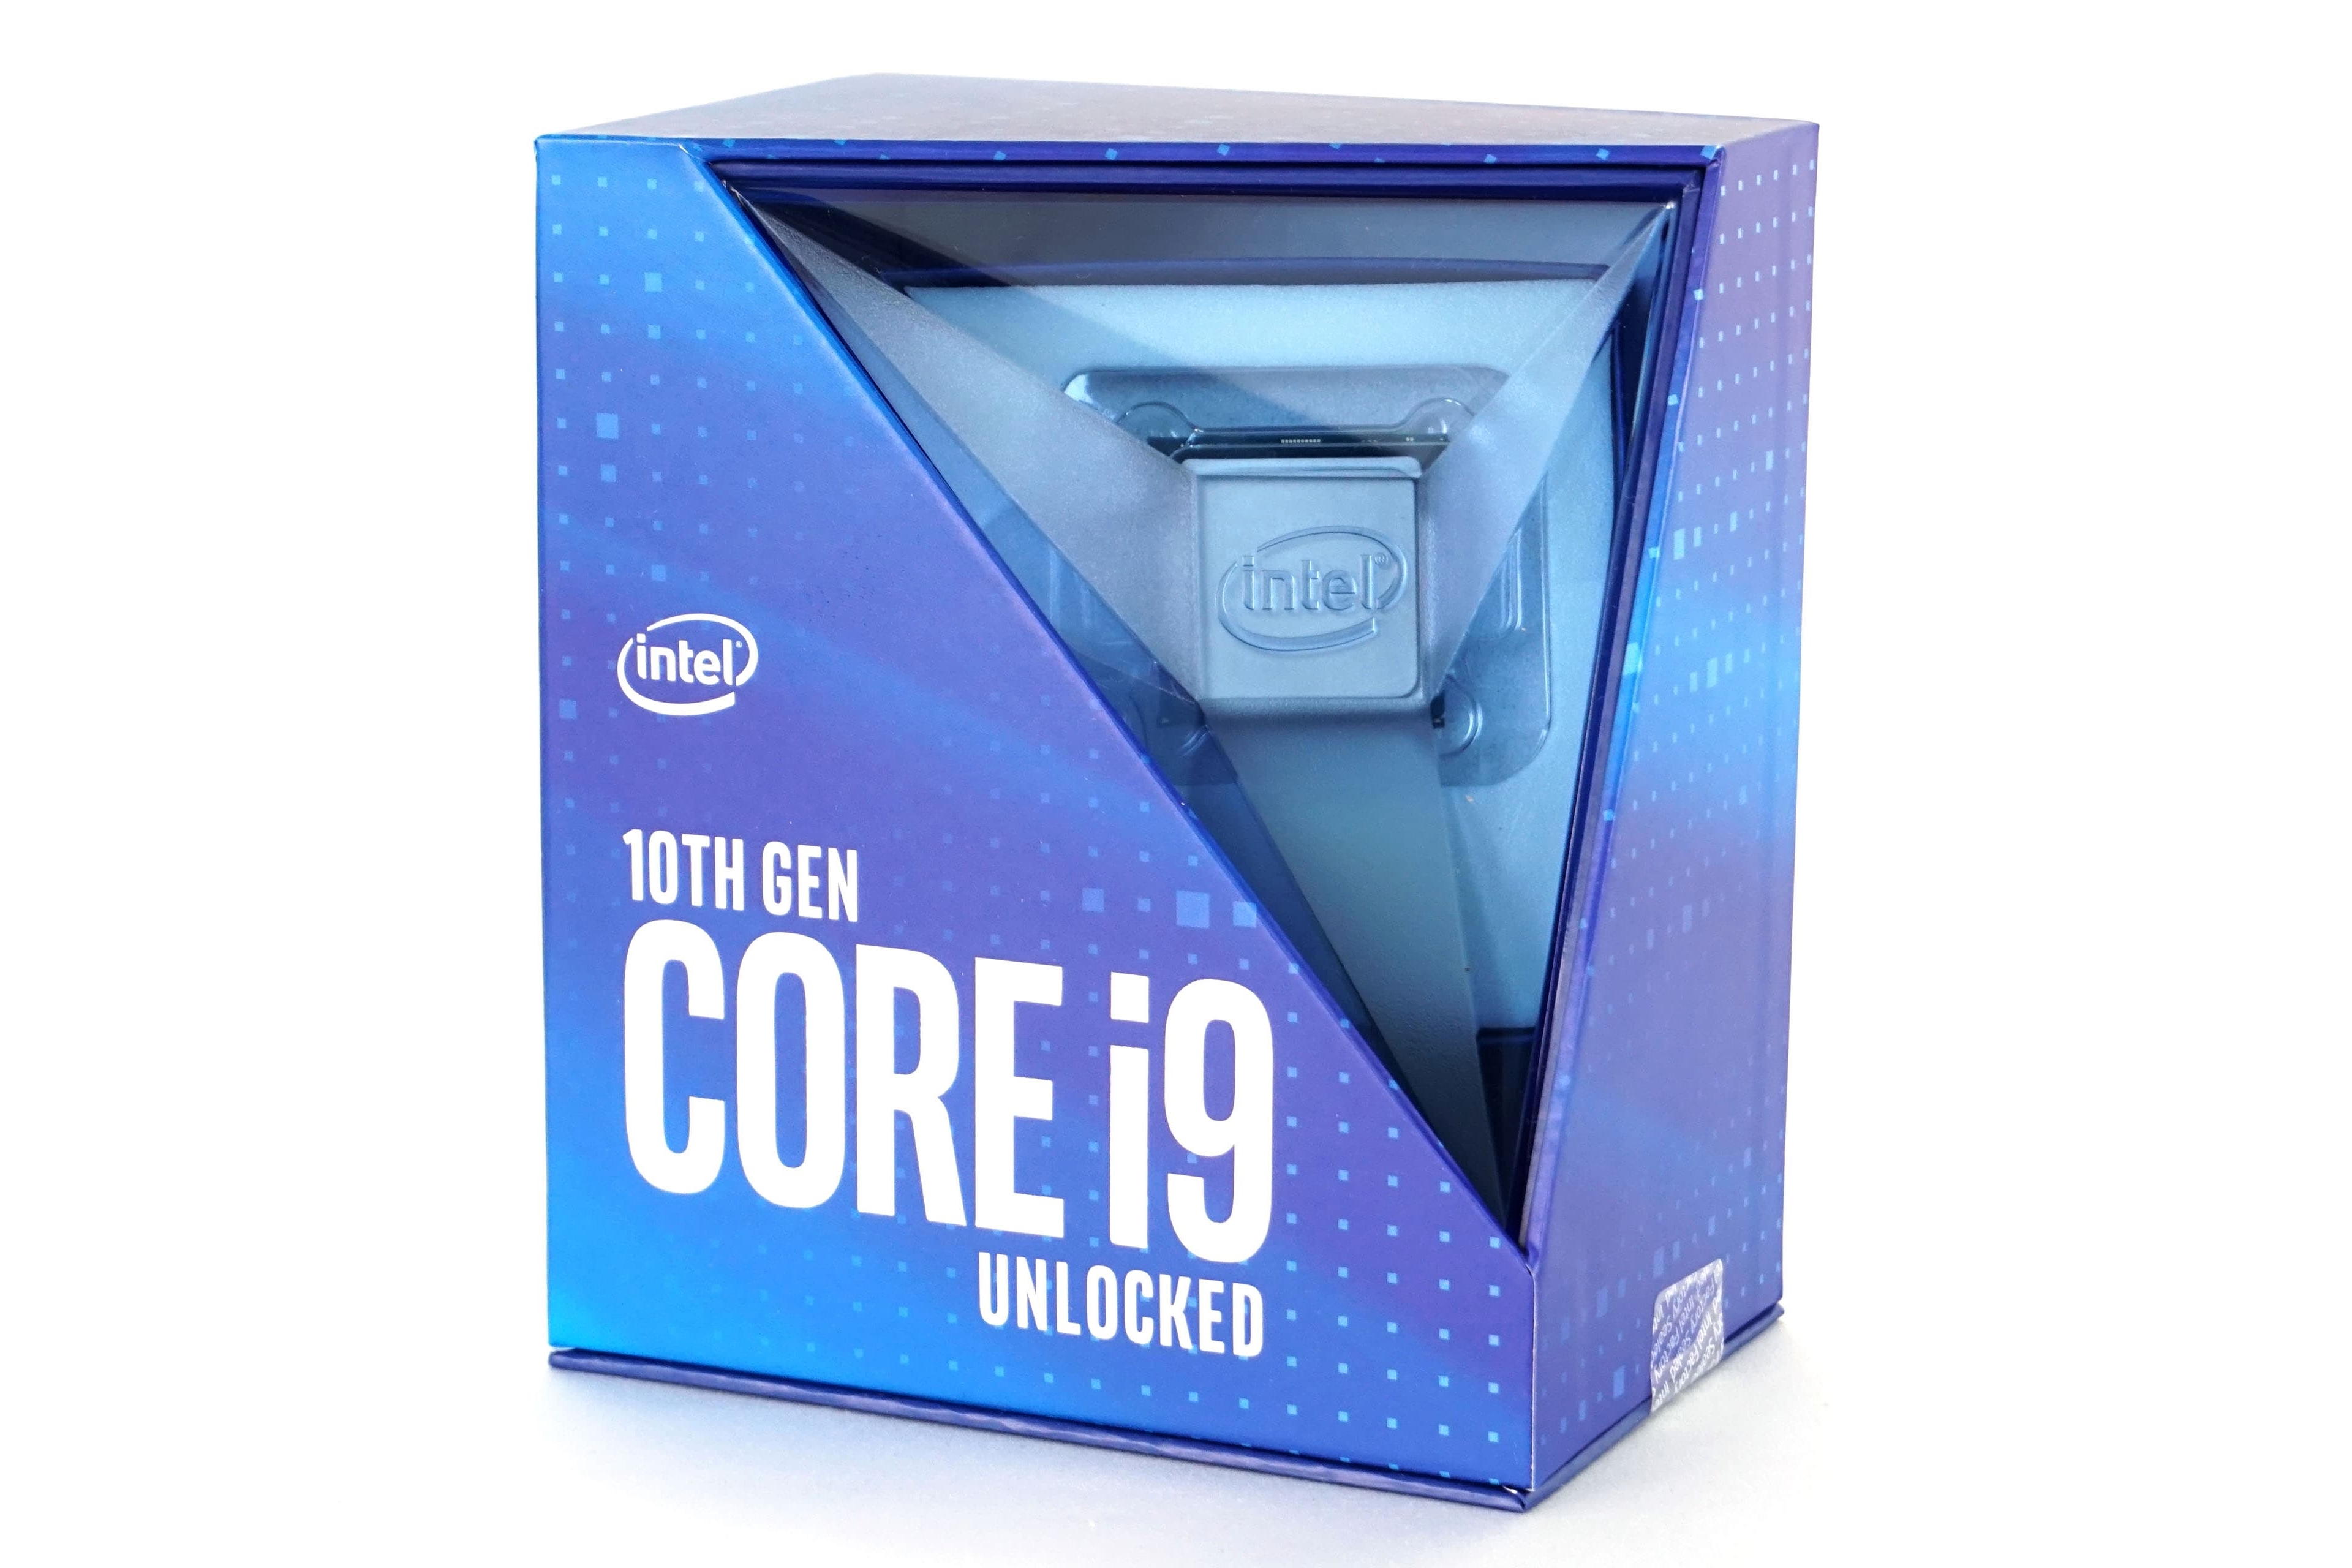 Intel Core i9-10900K - Review 2020 - PCMag Middle East